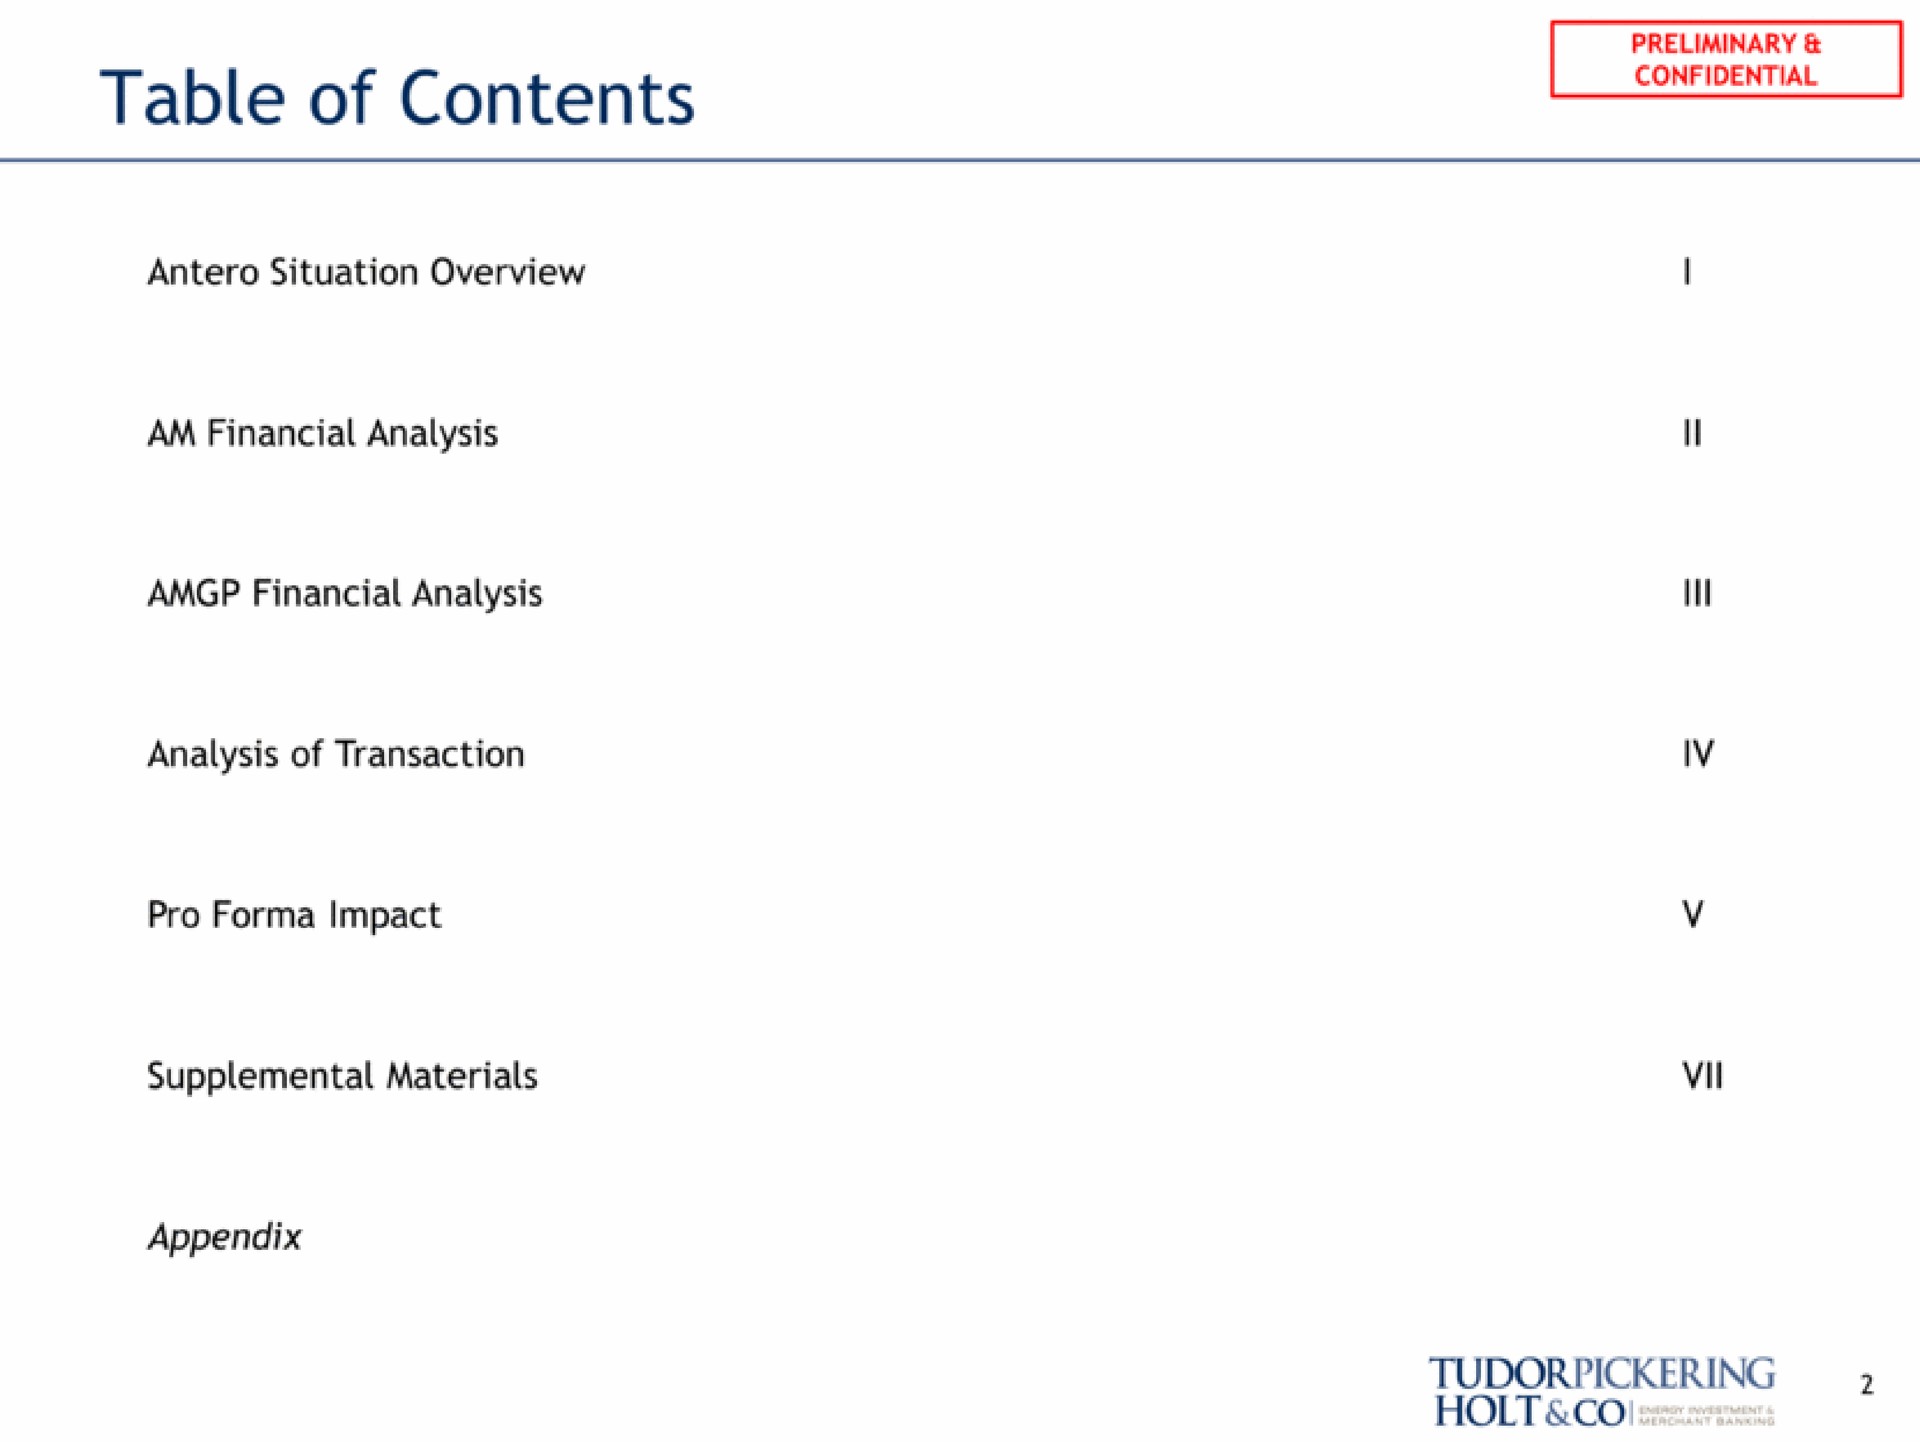 table of contents analysis of transaction supplemental materials confidential holt | Tudor, Pickering, Holt & Co